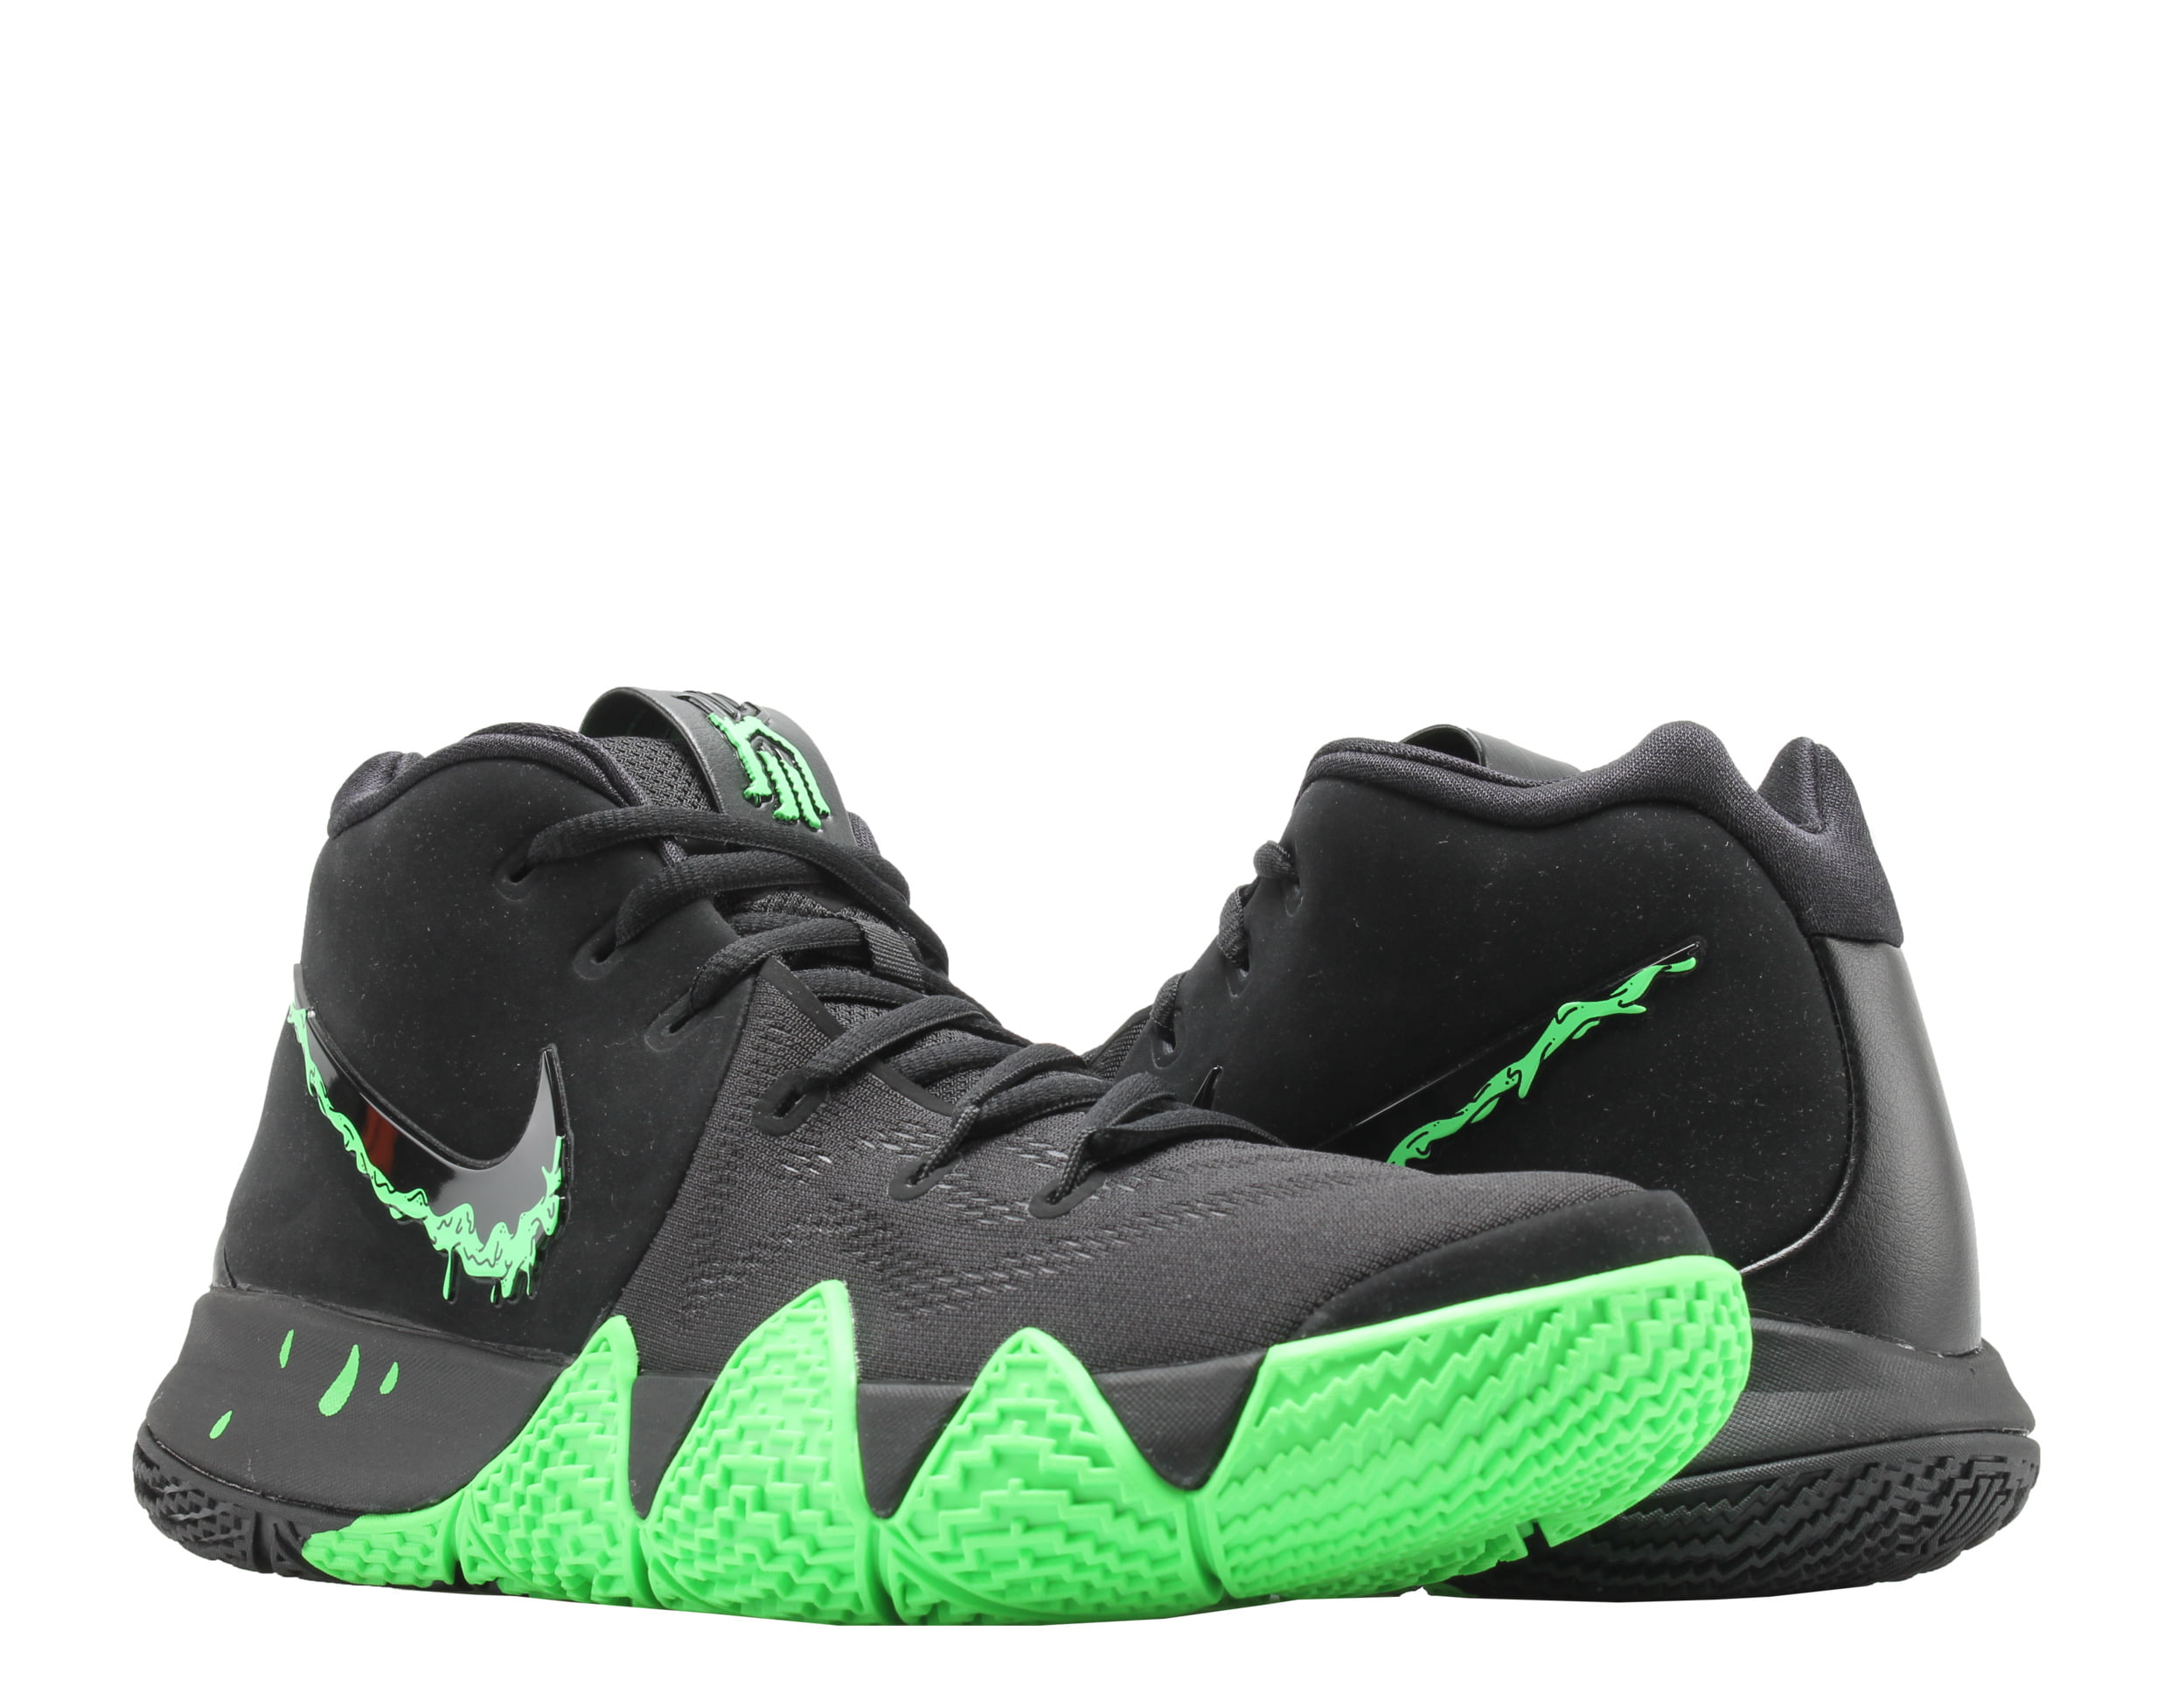 kyrie 4 halloween shoes